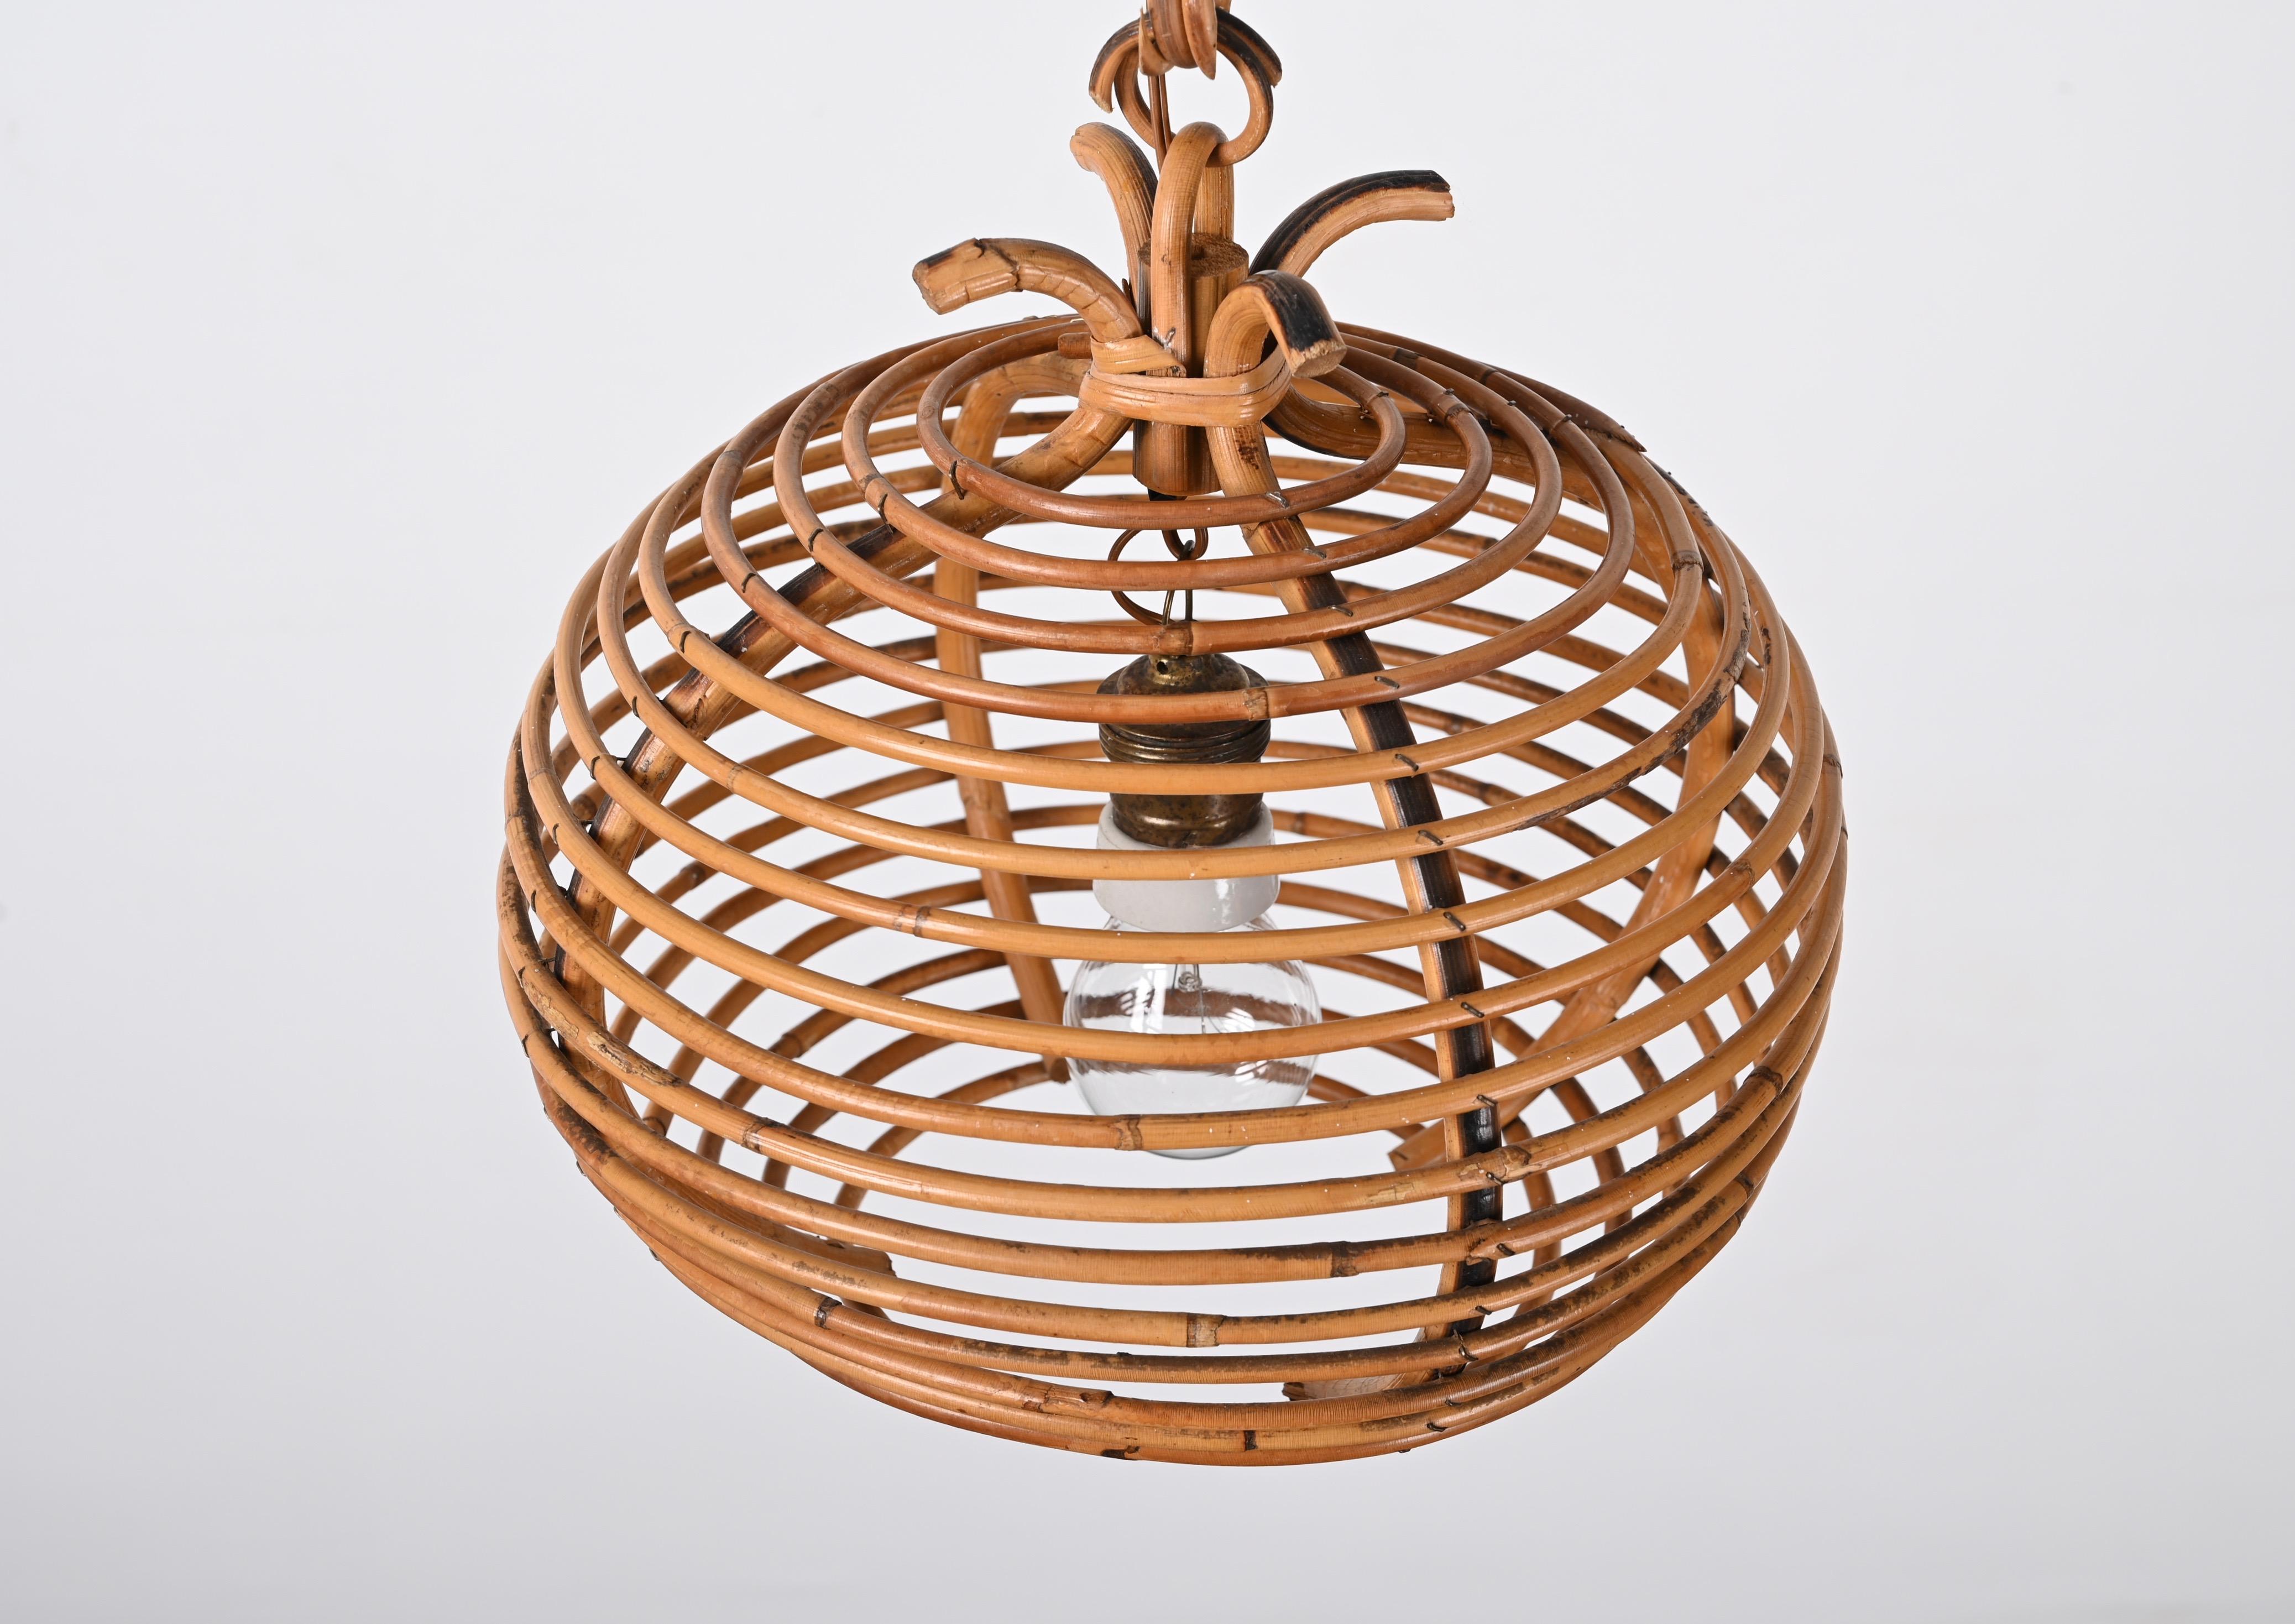 Midcentury French Riviera Bambo and Rattan Spherical Italian Chandelier, 1960s For Sale 6